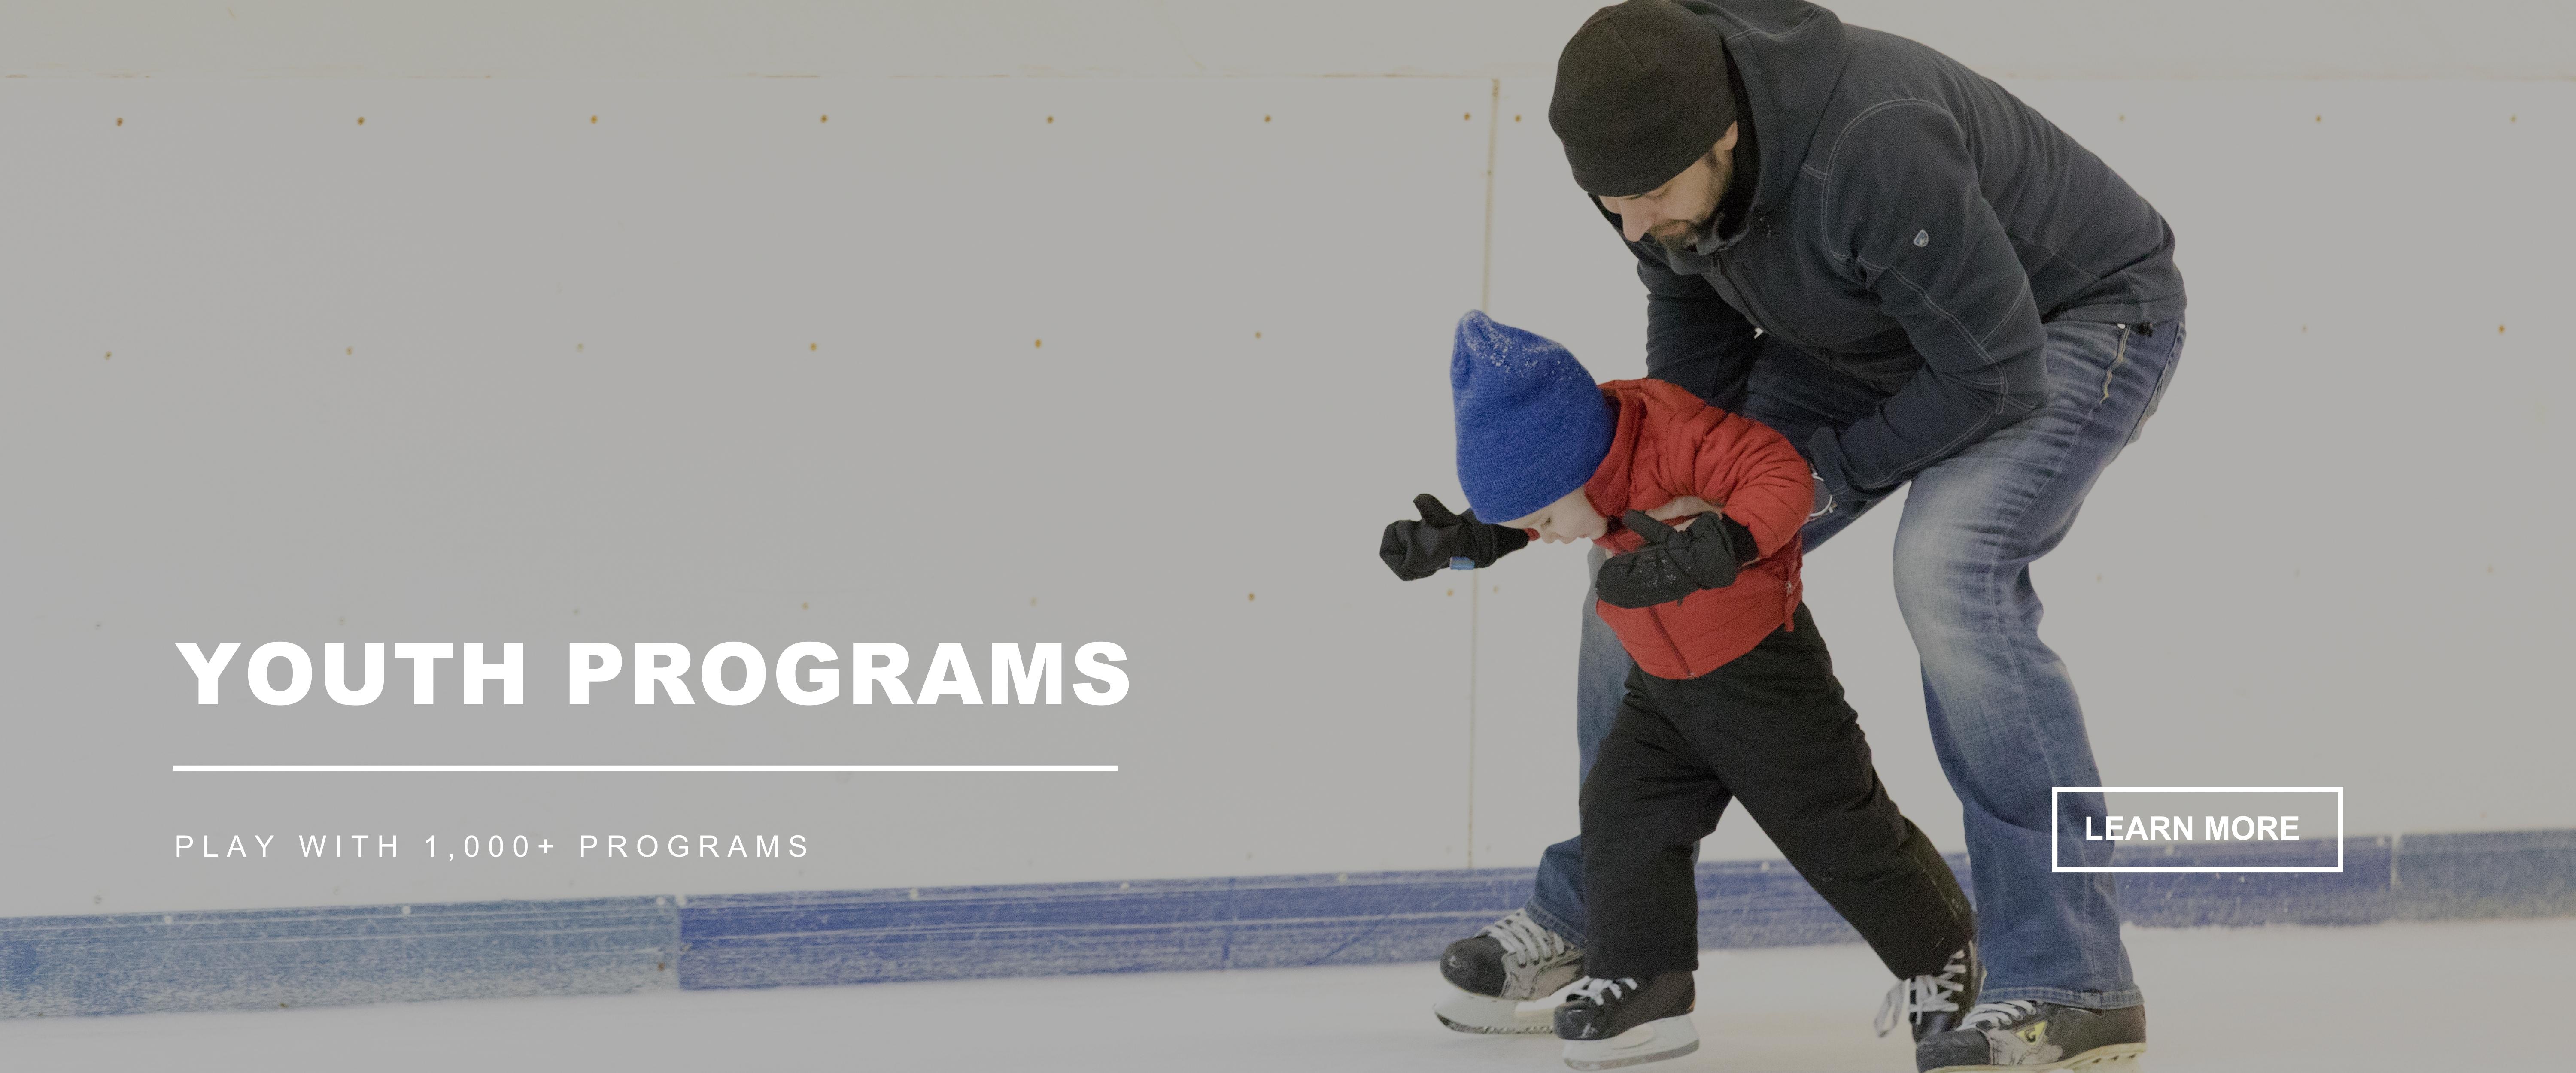 YOUTH PROGRAMS - Play with 1,000+ programs - Father and son skating in an indoor skating rink with father holding up young son - Learn More button